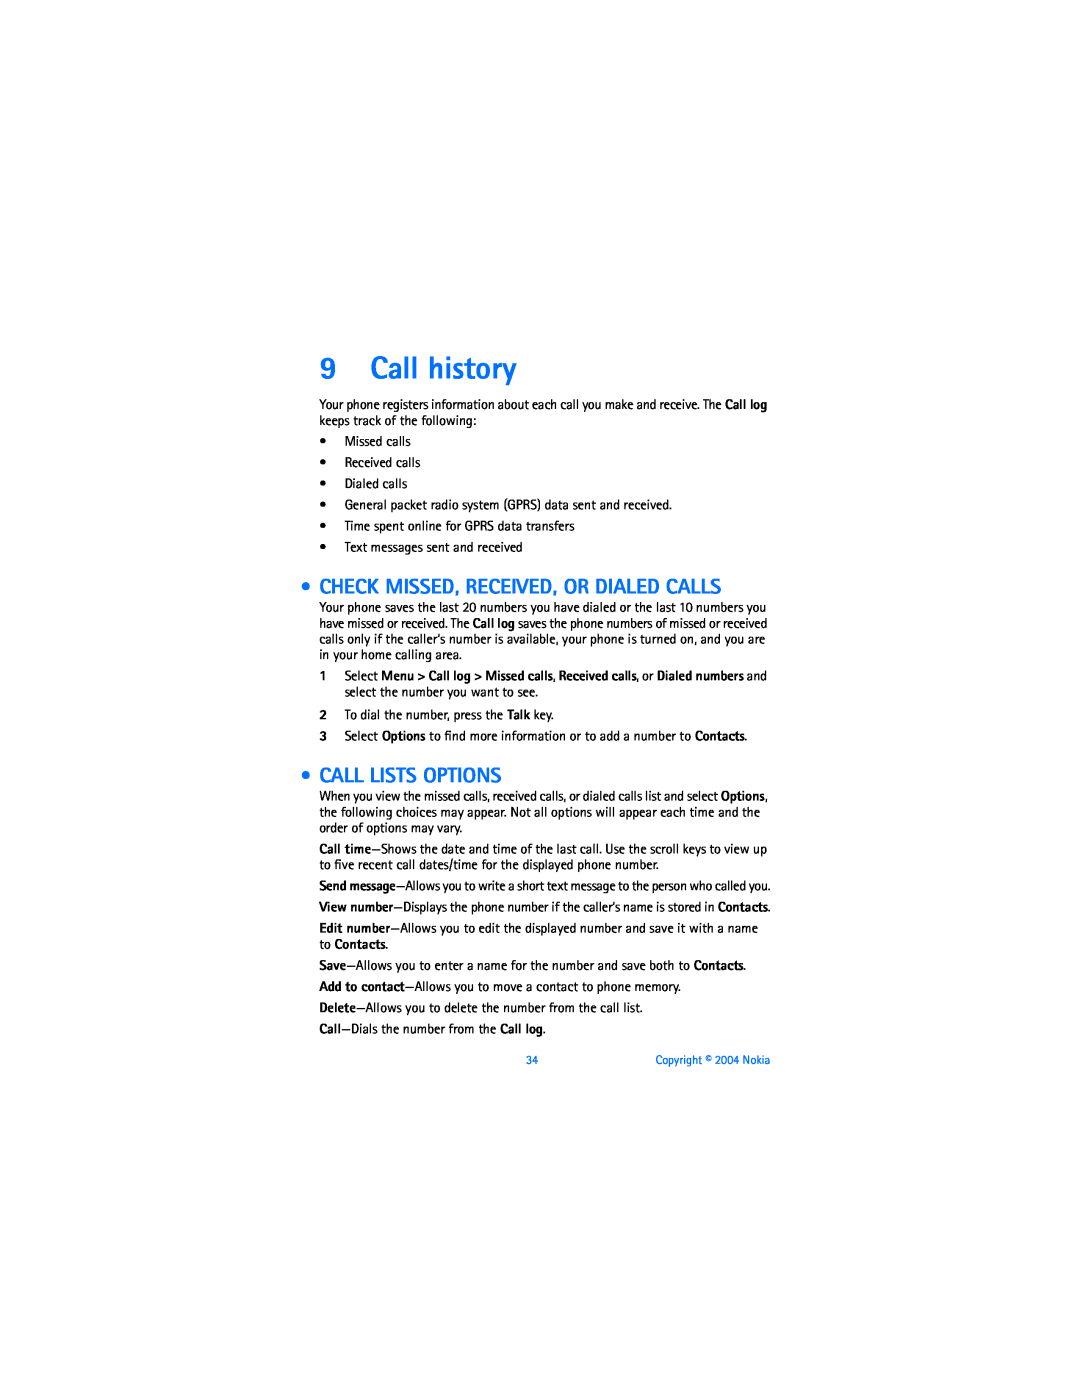 Nokia 6010 warranty Call history, Check Missed, Received, Or Dialed Calls, Call Lists Options 